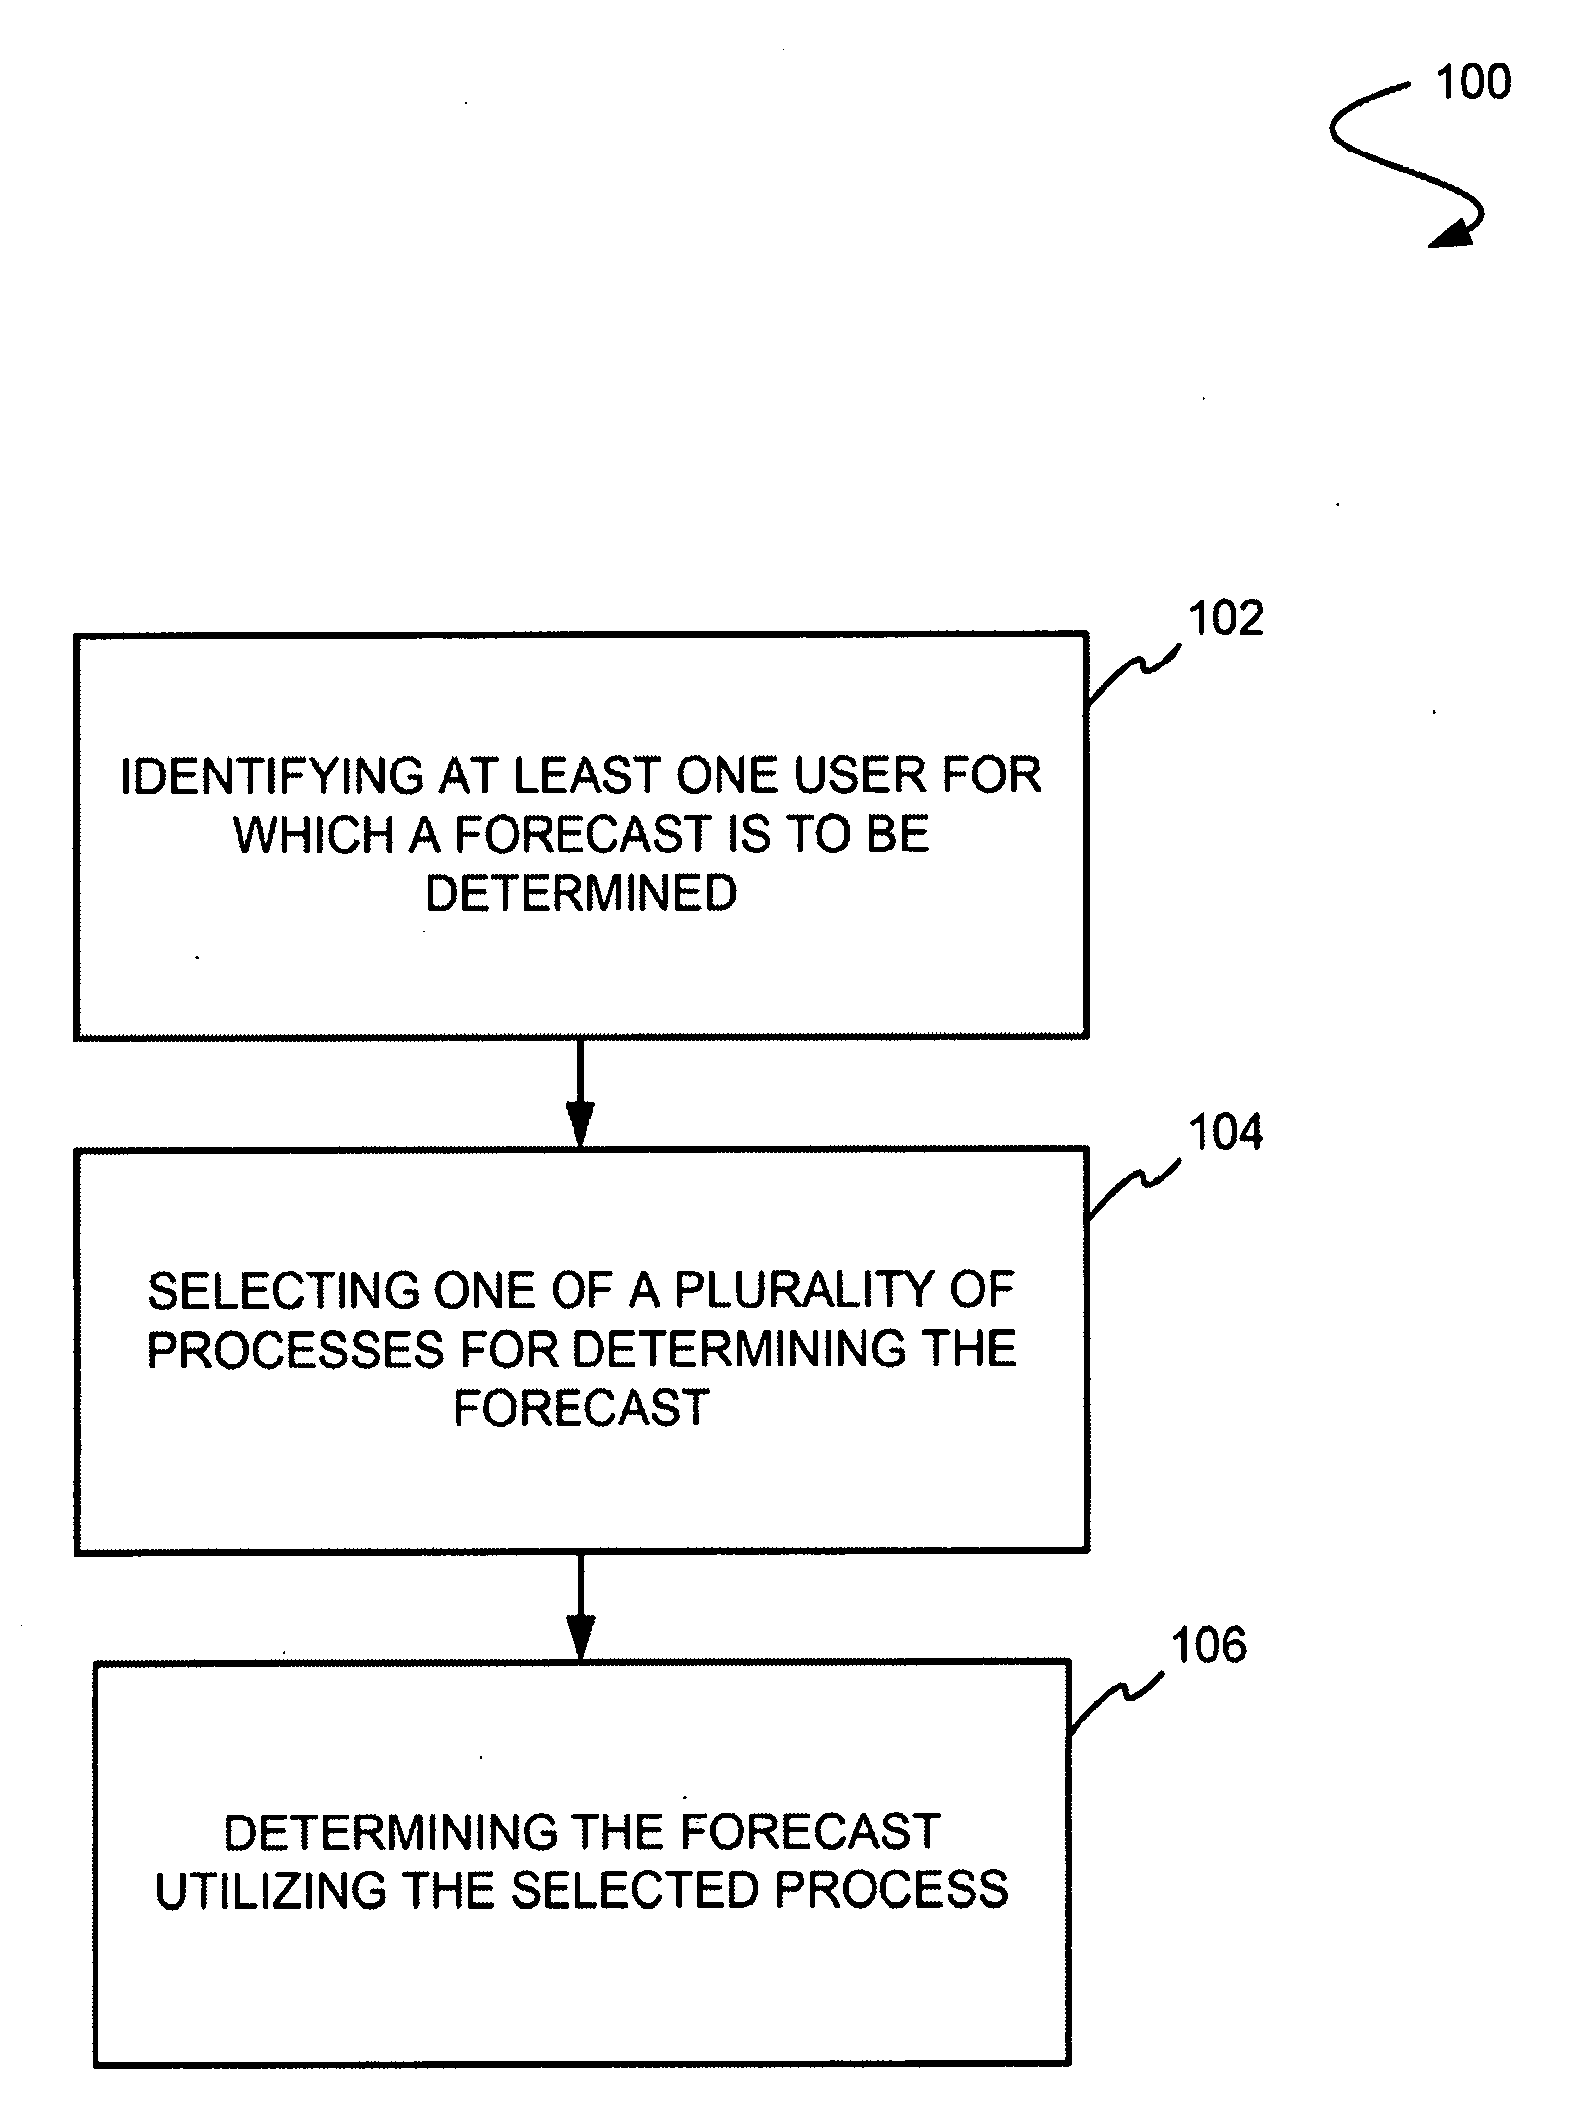 Method and system for selecting a synchronous or asynchronous process to determine a forecast